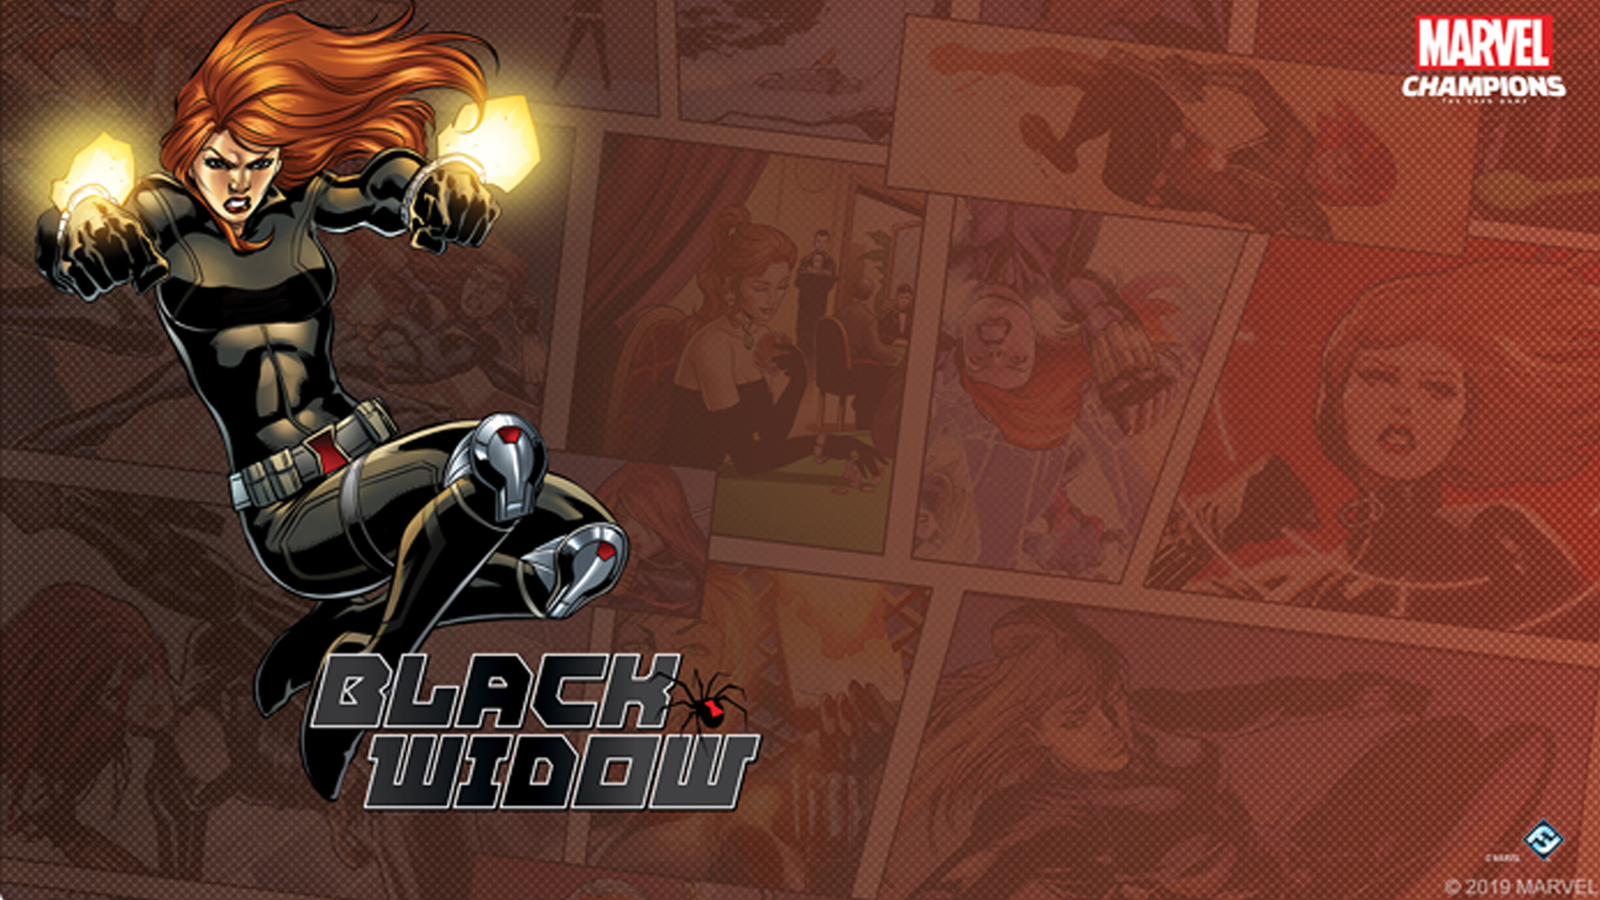 Black Widow: Looking for Love for Nintendo Switch - Nintendo Official Site